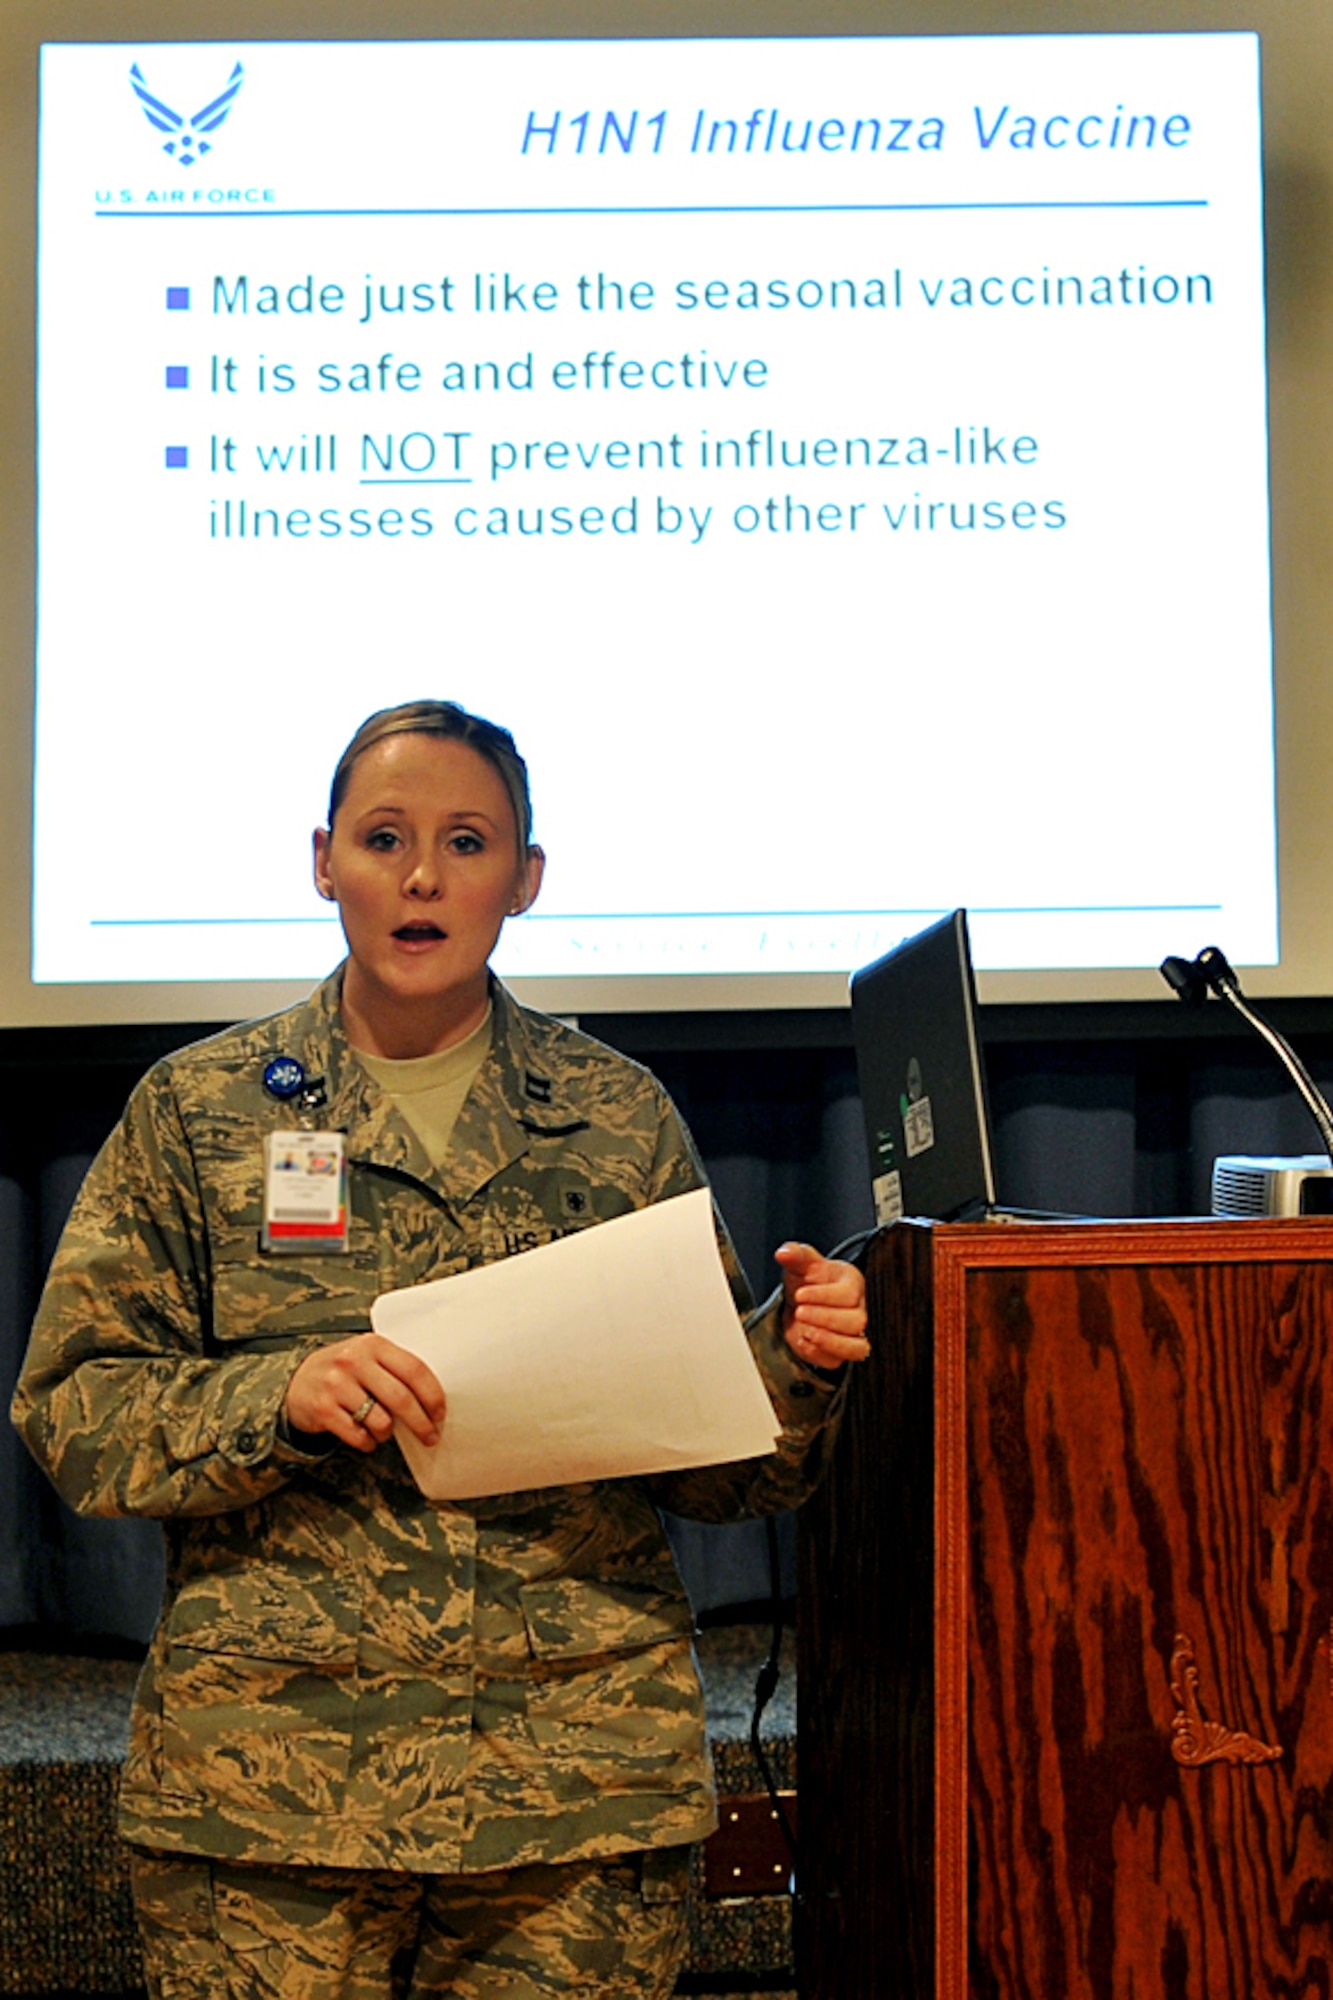 OFFUTT AIR FORCE BASE, Neb. - Capt. Marcie Lewis,  with the 55th Medical Support Squadron, briefs members of Team Offutt about the H1N1 vaccine during a Point of Distribution exercise Jan. 21 at the community center here. More than 1,000 active-duty personnel processed through the center to test the 55th Wing's ability to respond to a public health emergency.  Many received their H1N1 inoculation during the event. U.S. Air Force photo by Charles Haymond
